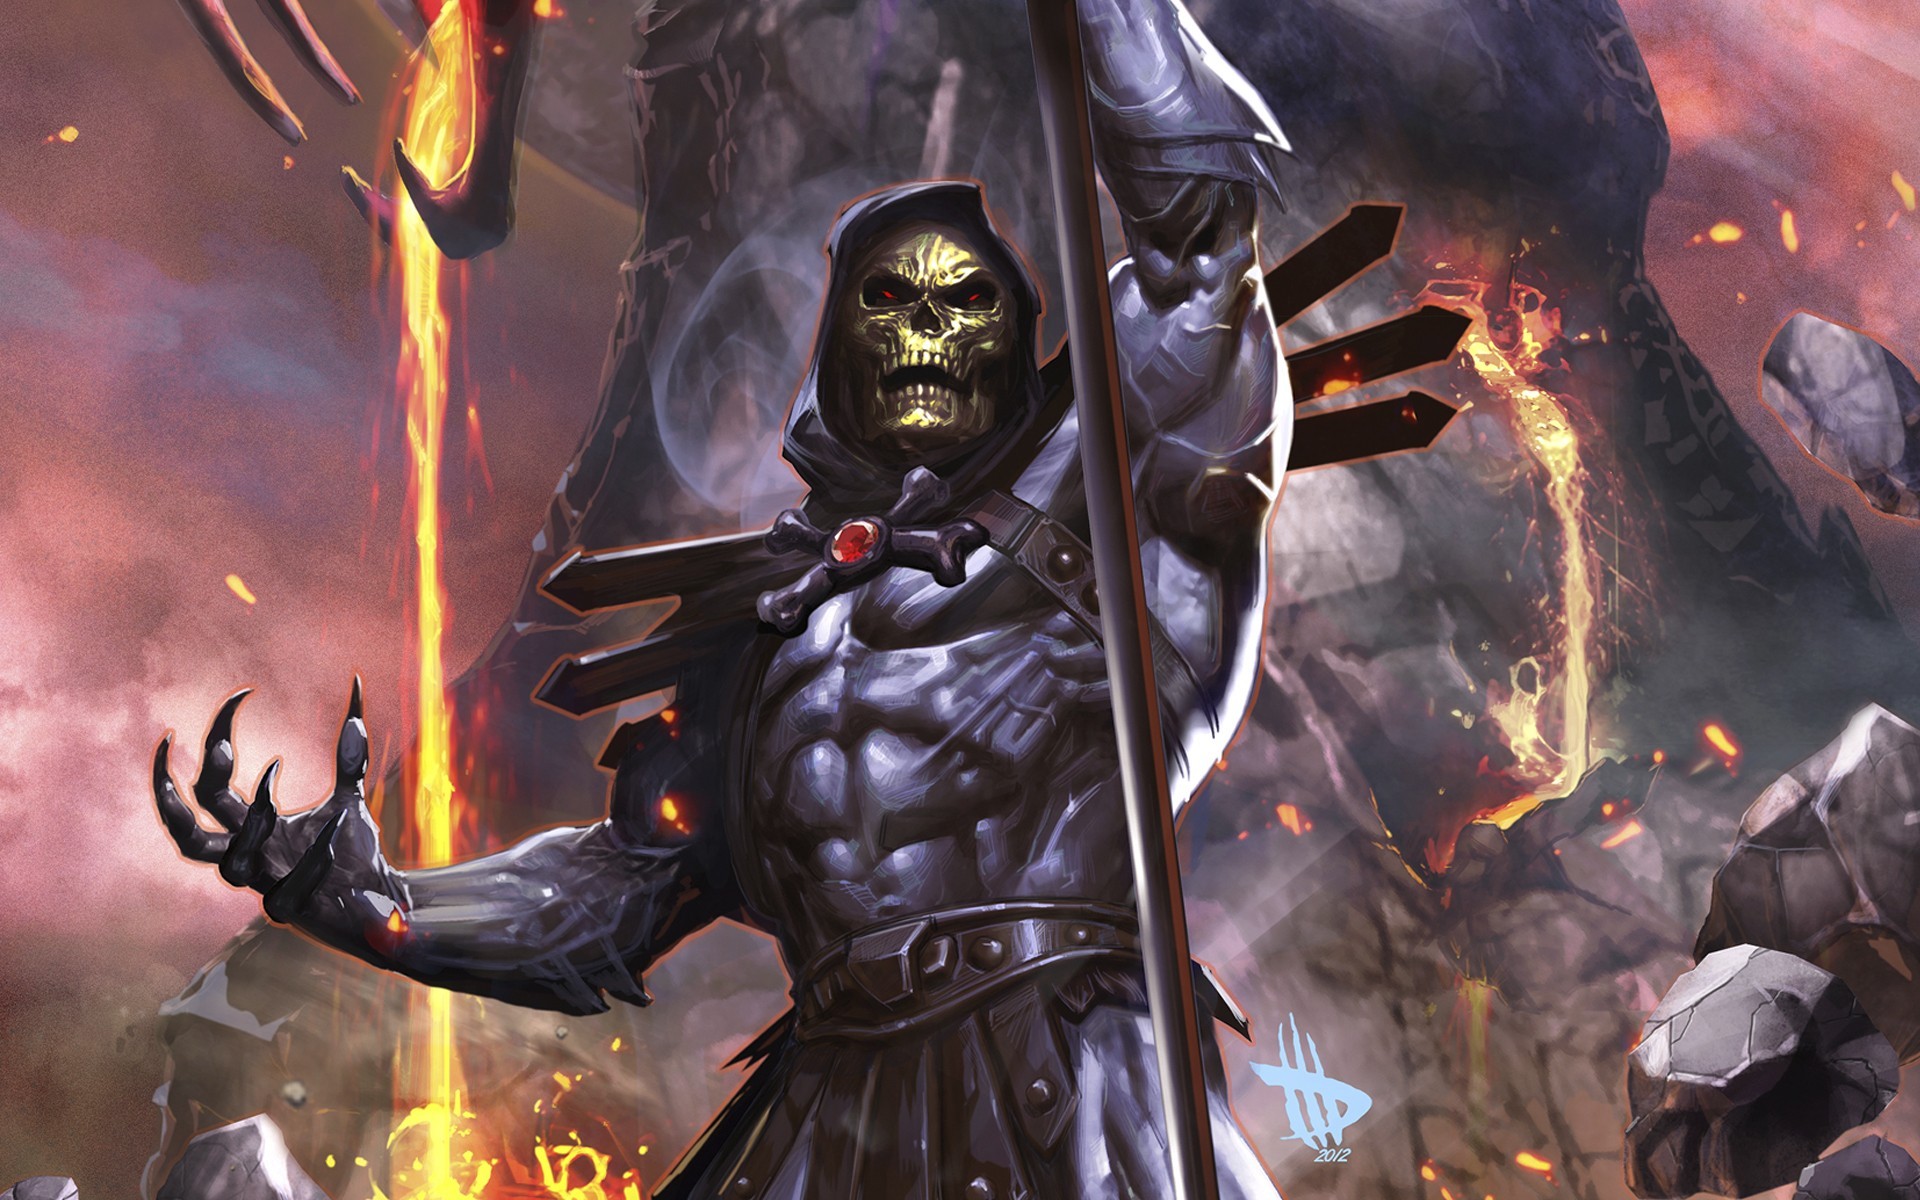 General 1920x1200 Skeletor He-Man fantasy art He-Man and the Masters of the Universe villains skull